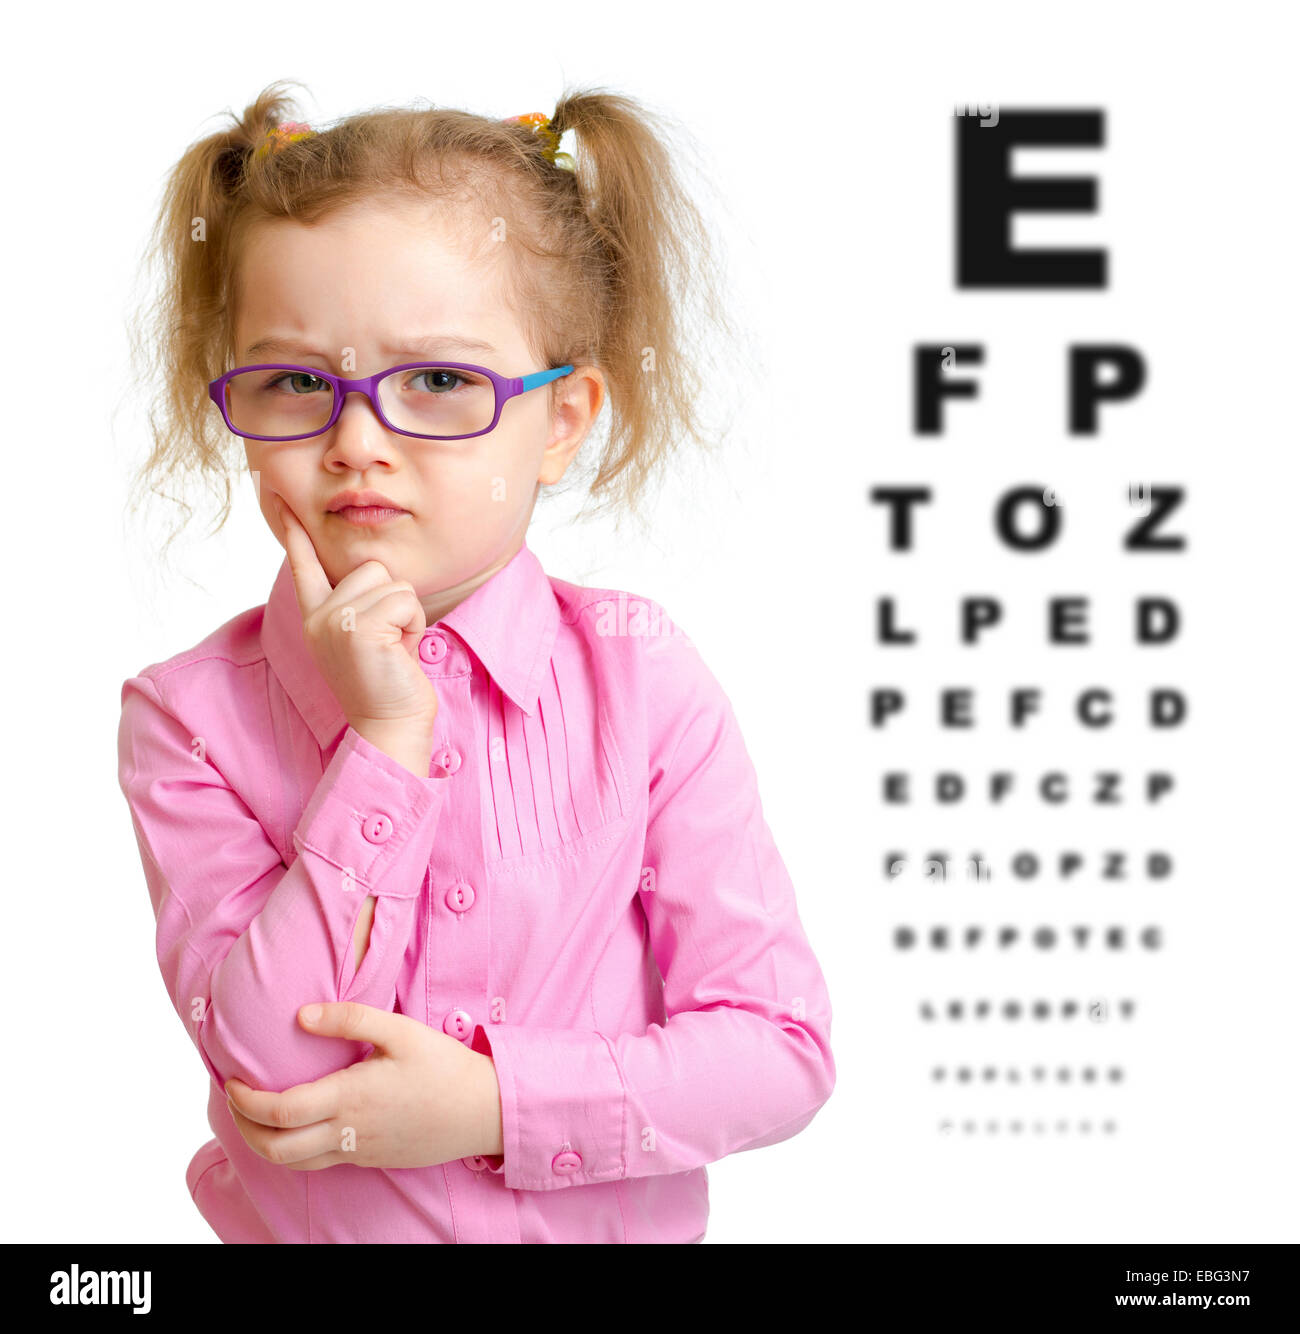 Serious girl in glasses with eye chart isolated Stock Photo